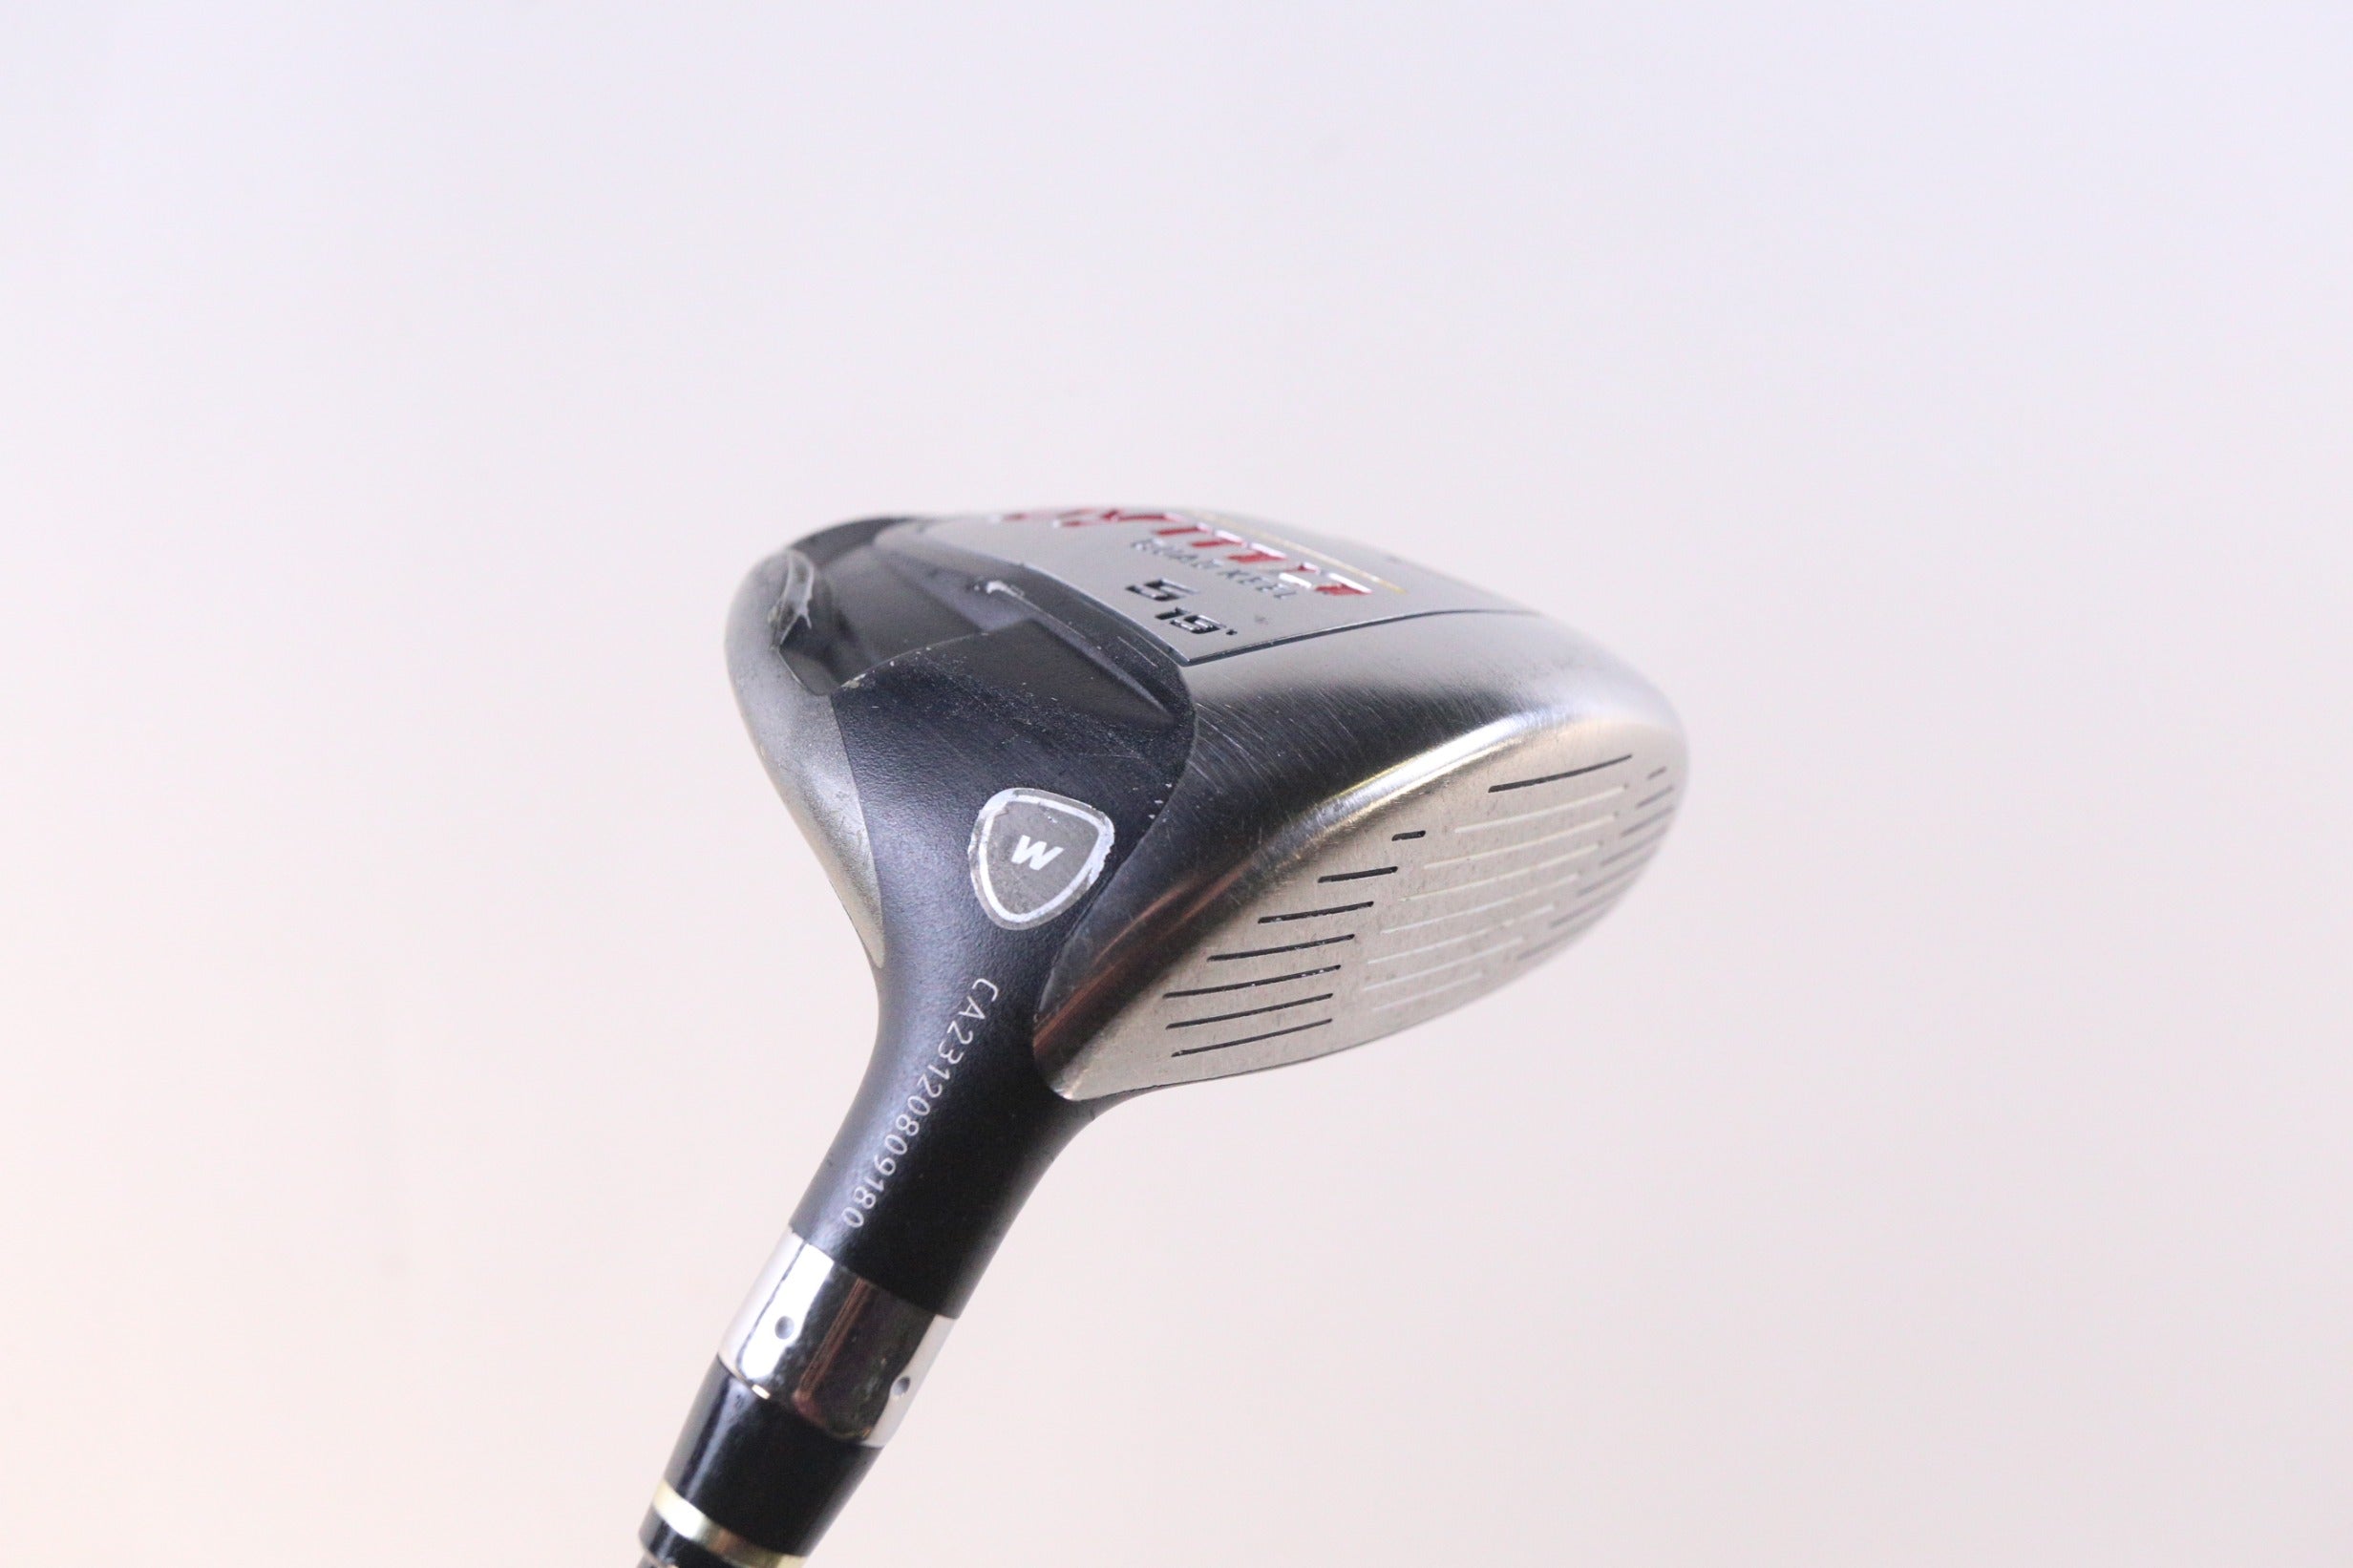 Used Nike SQ Dymo Right-Handed Fairway Wood – Next Round